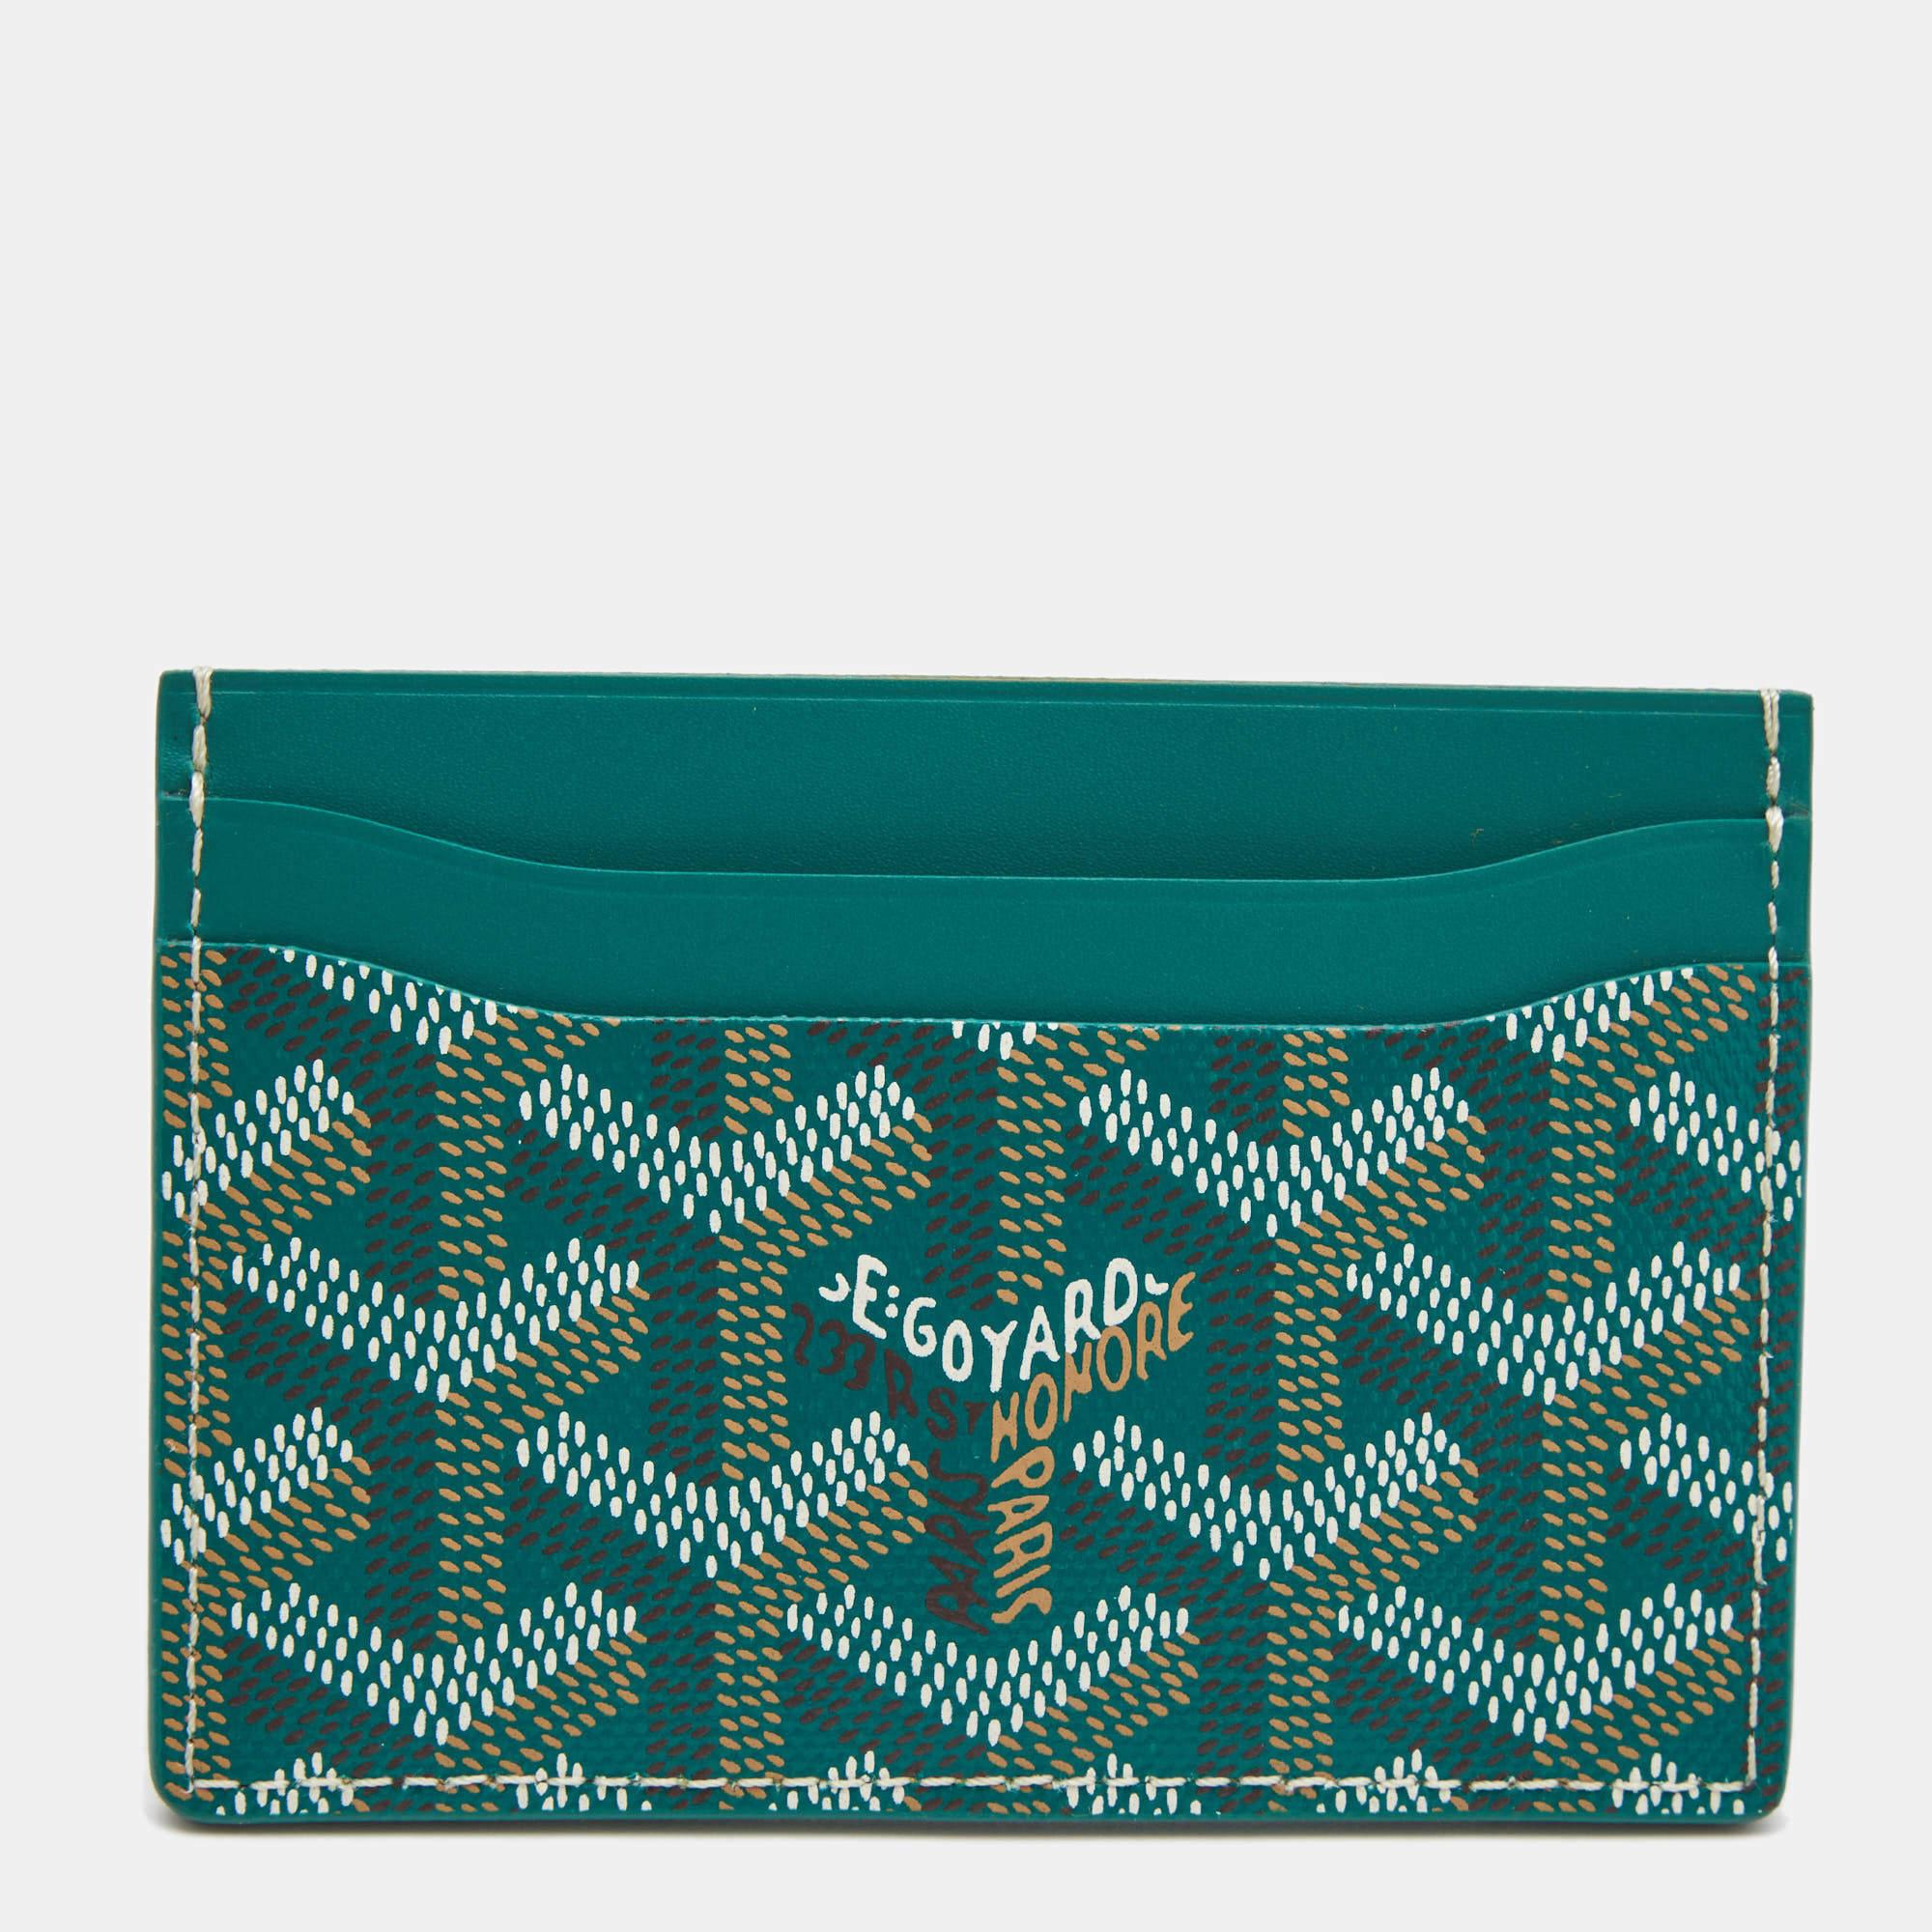 Named after the Saint Sulpice Church located in Paris and made popular by Dan Brown's best-selling novel The Da Vinci Code, Goyard's cardholder symbolizes art and culture along with being a versatile accessory. Made in France from the label's